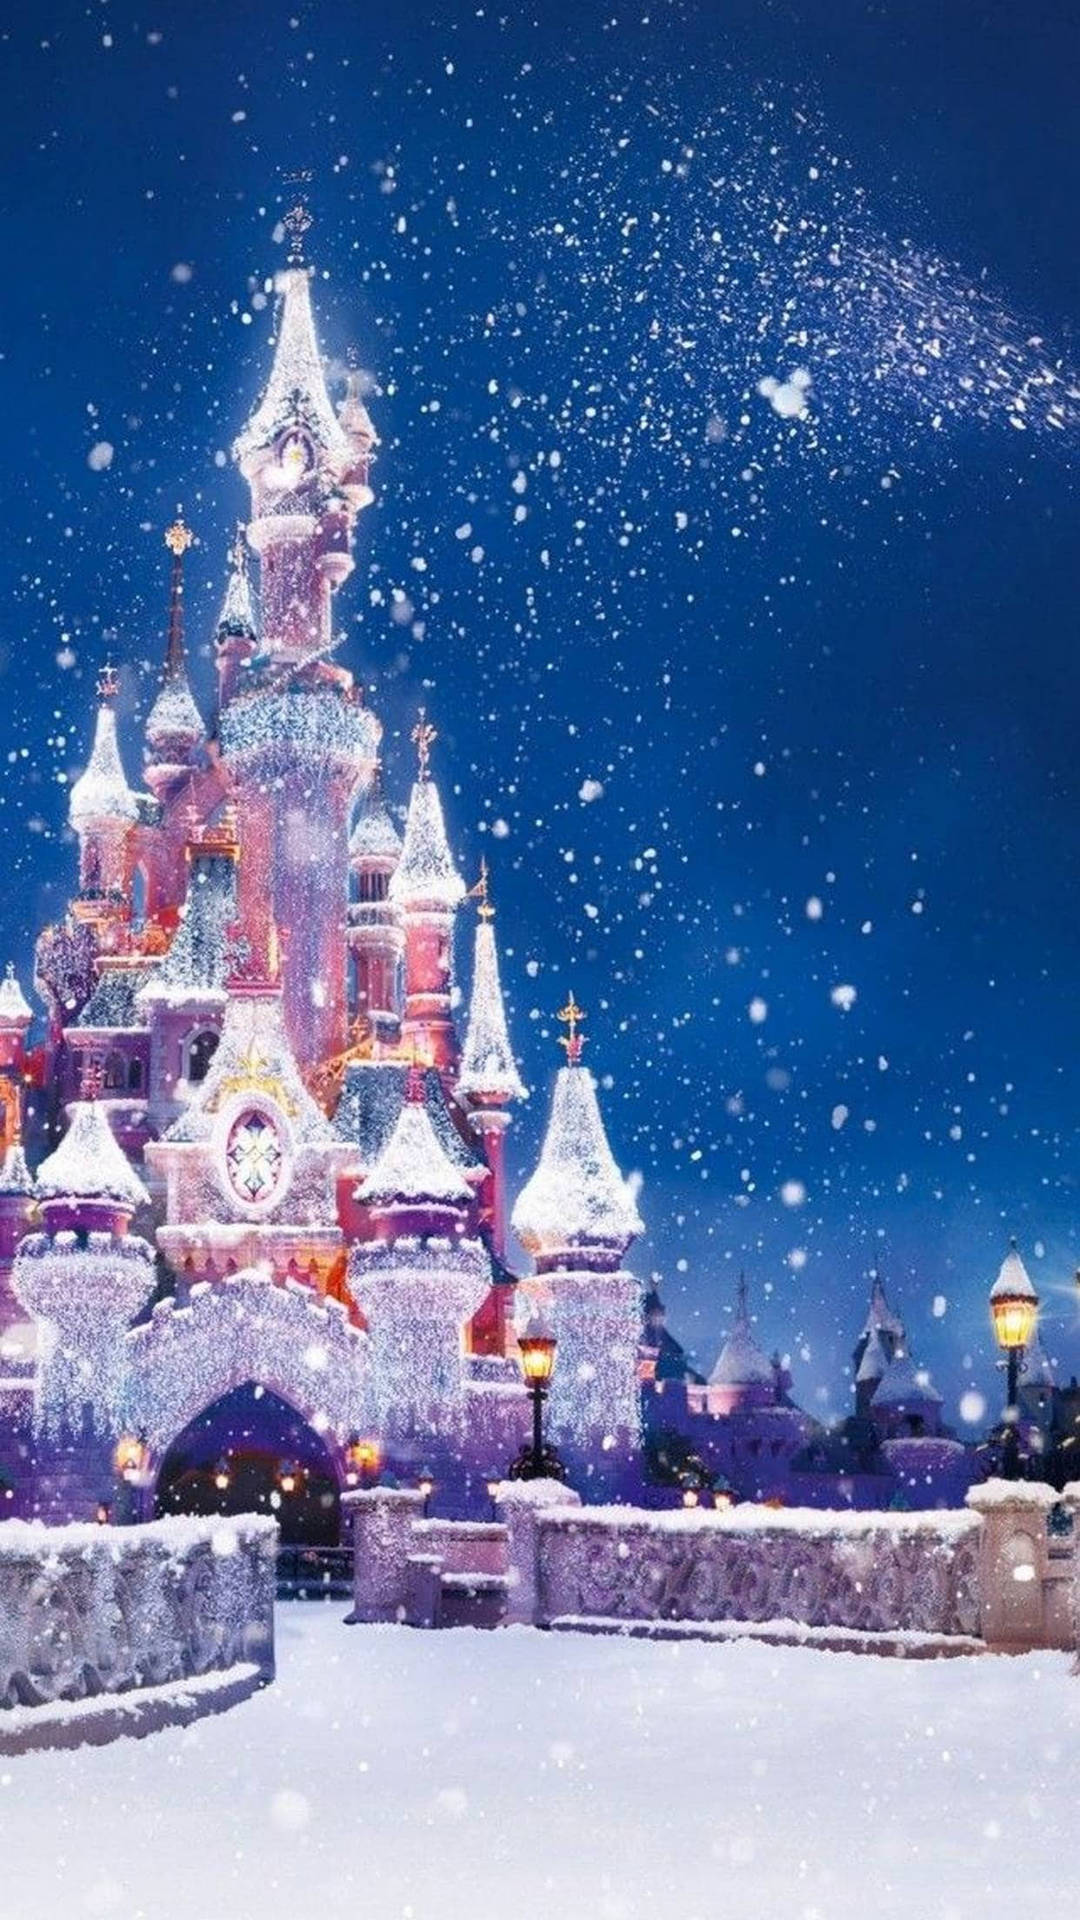 Snow Castle Aesthetic Christmas Iphone Background